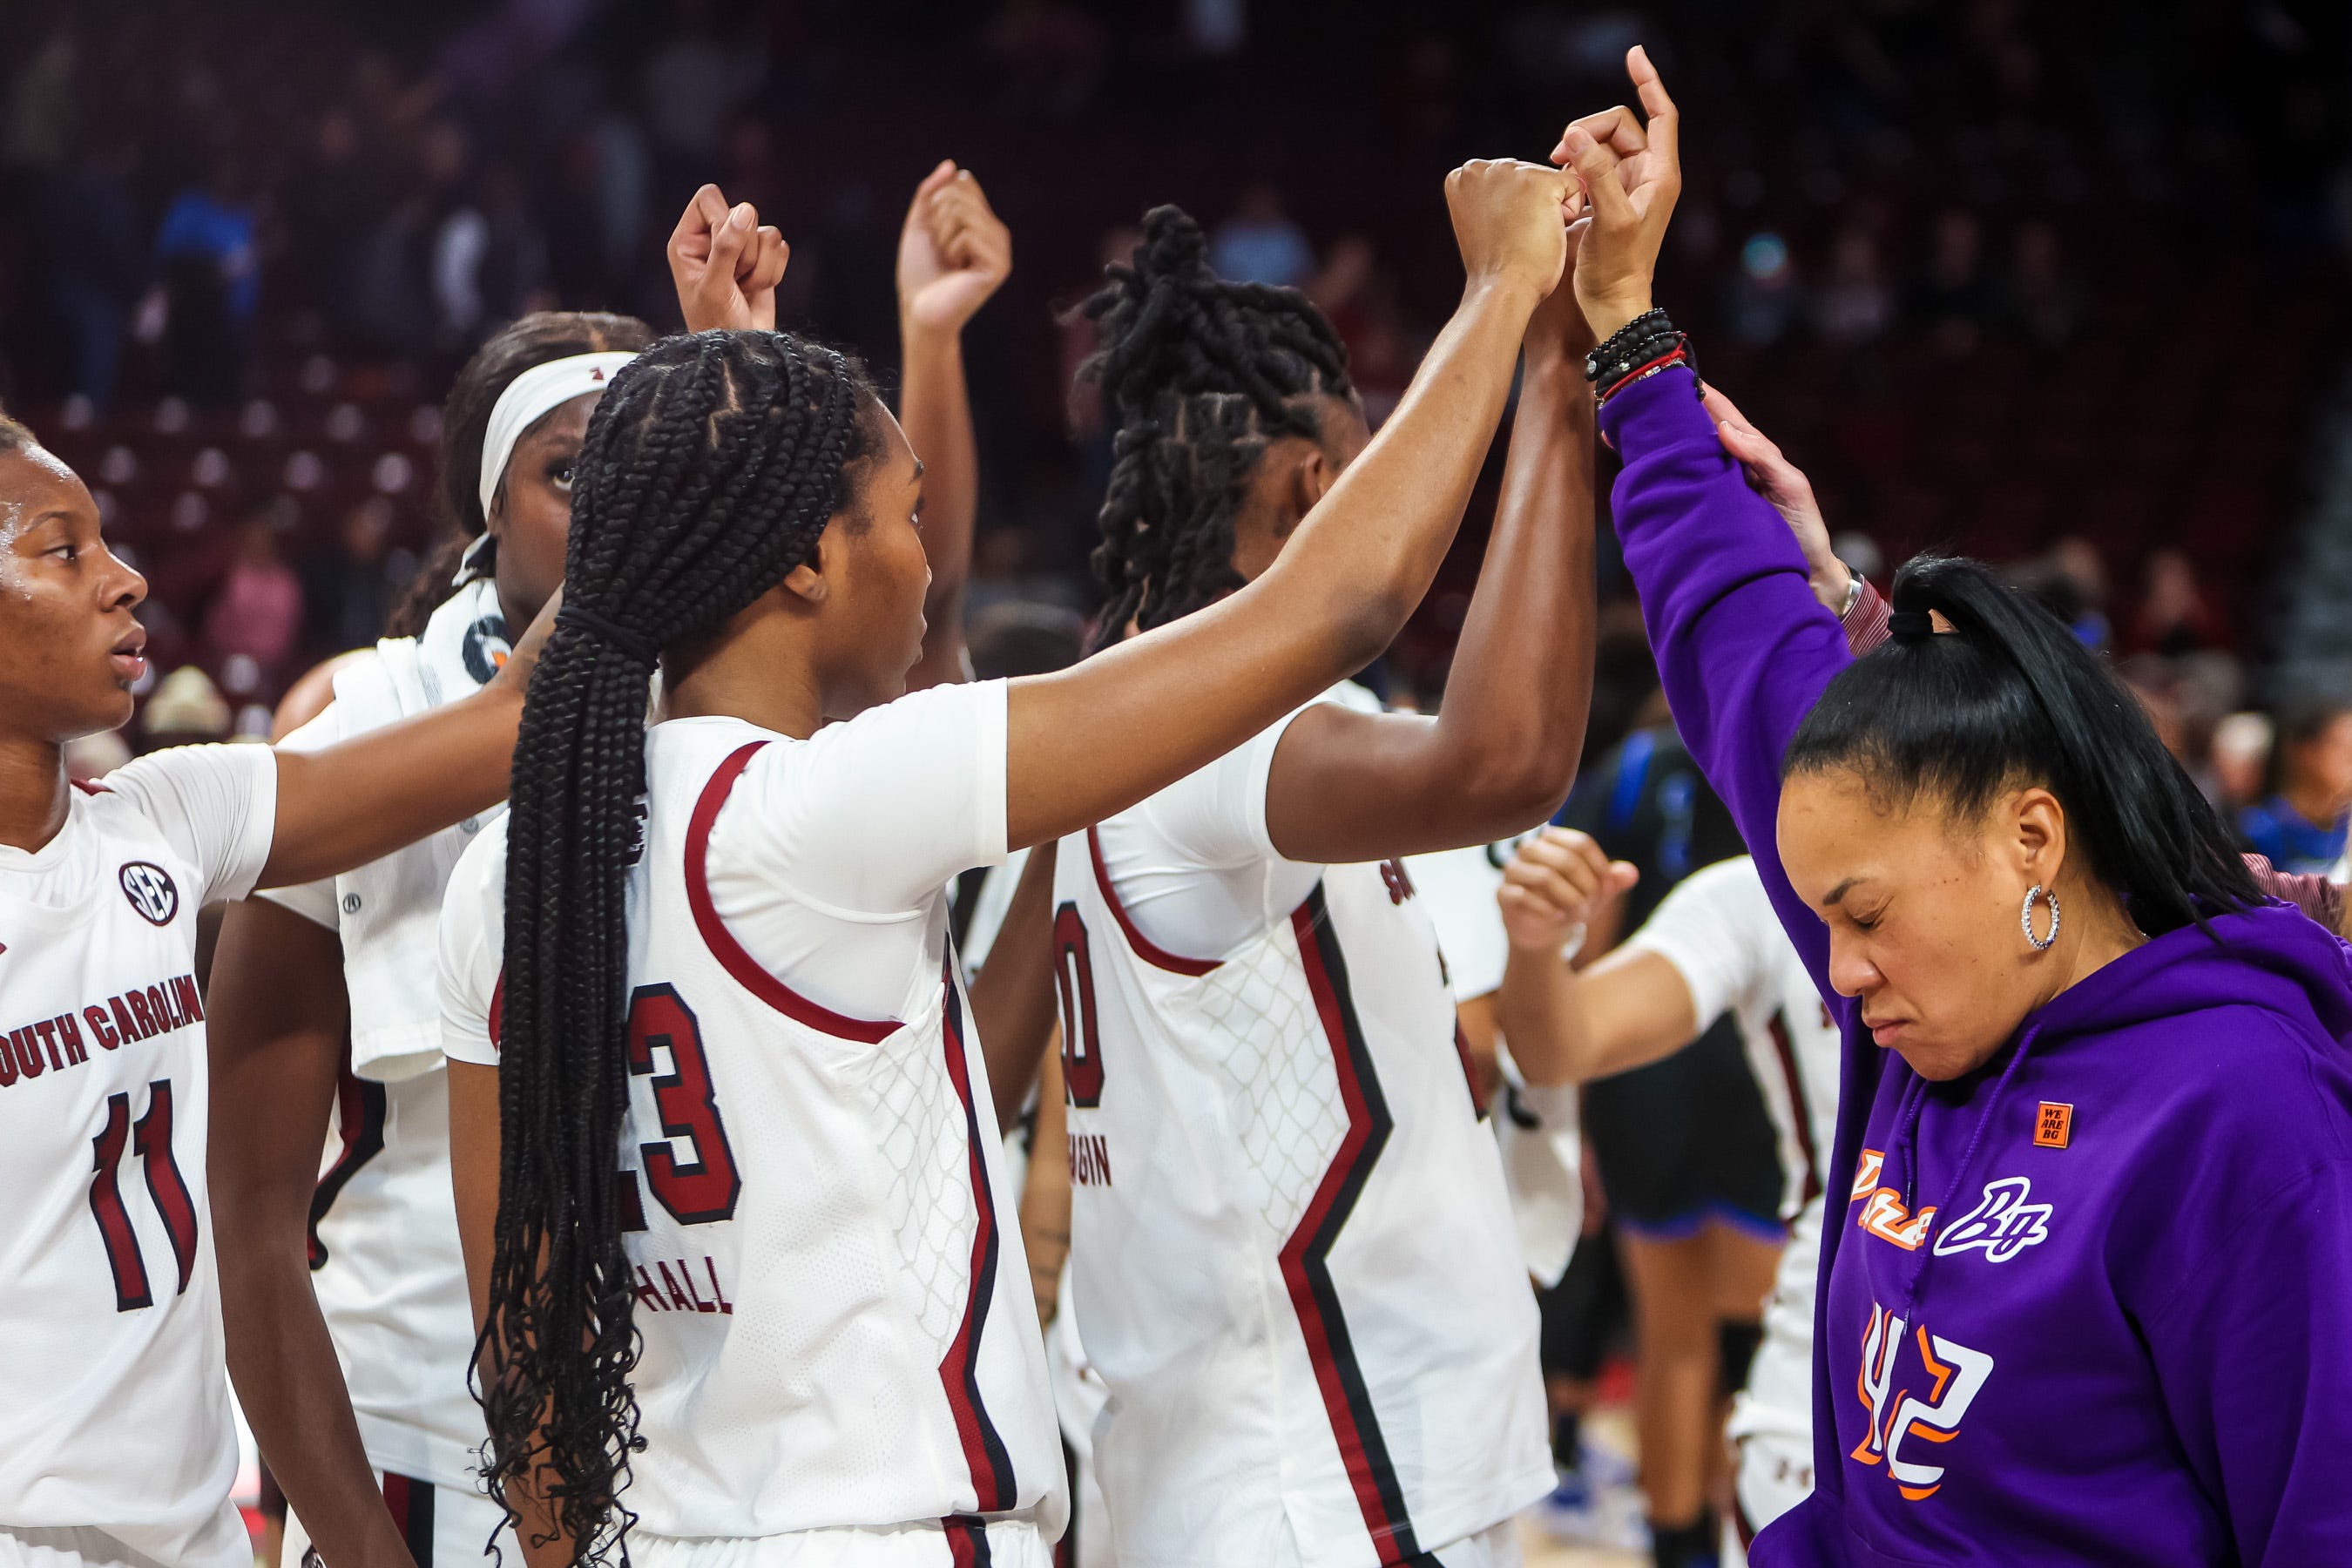 Dawn Staley, Gamecocks basketball coach, is titan on and off court